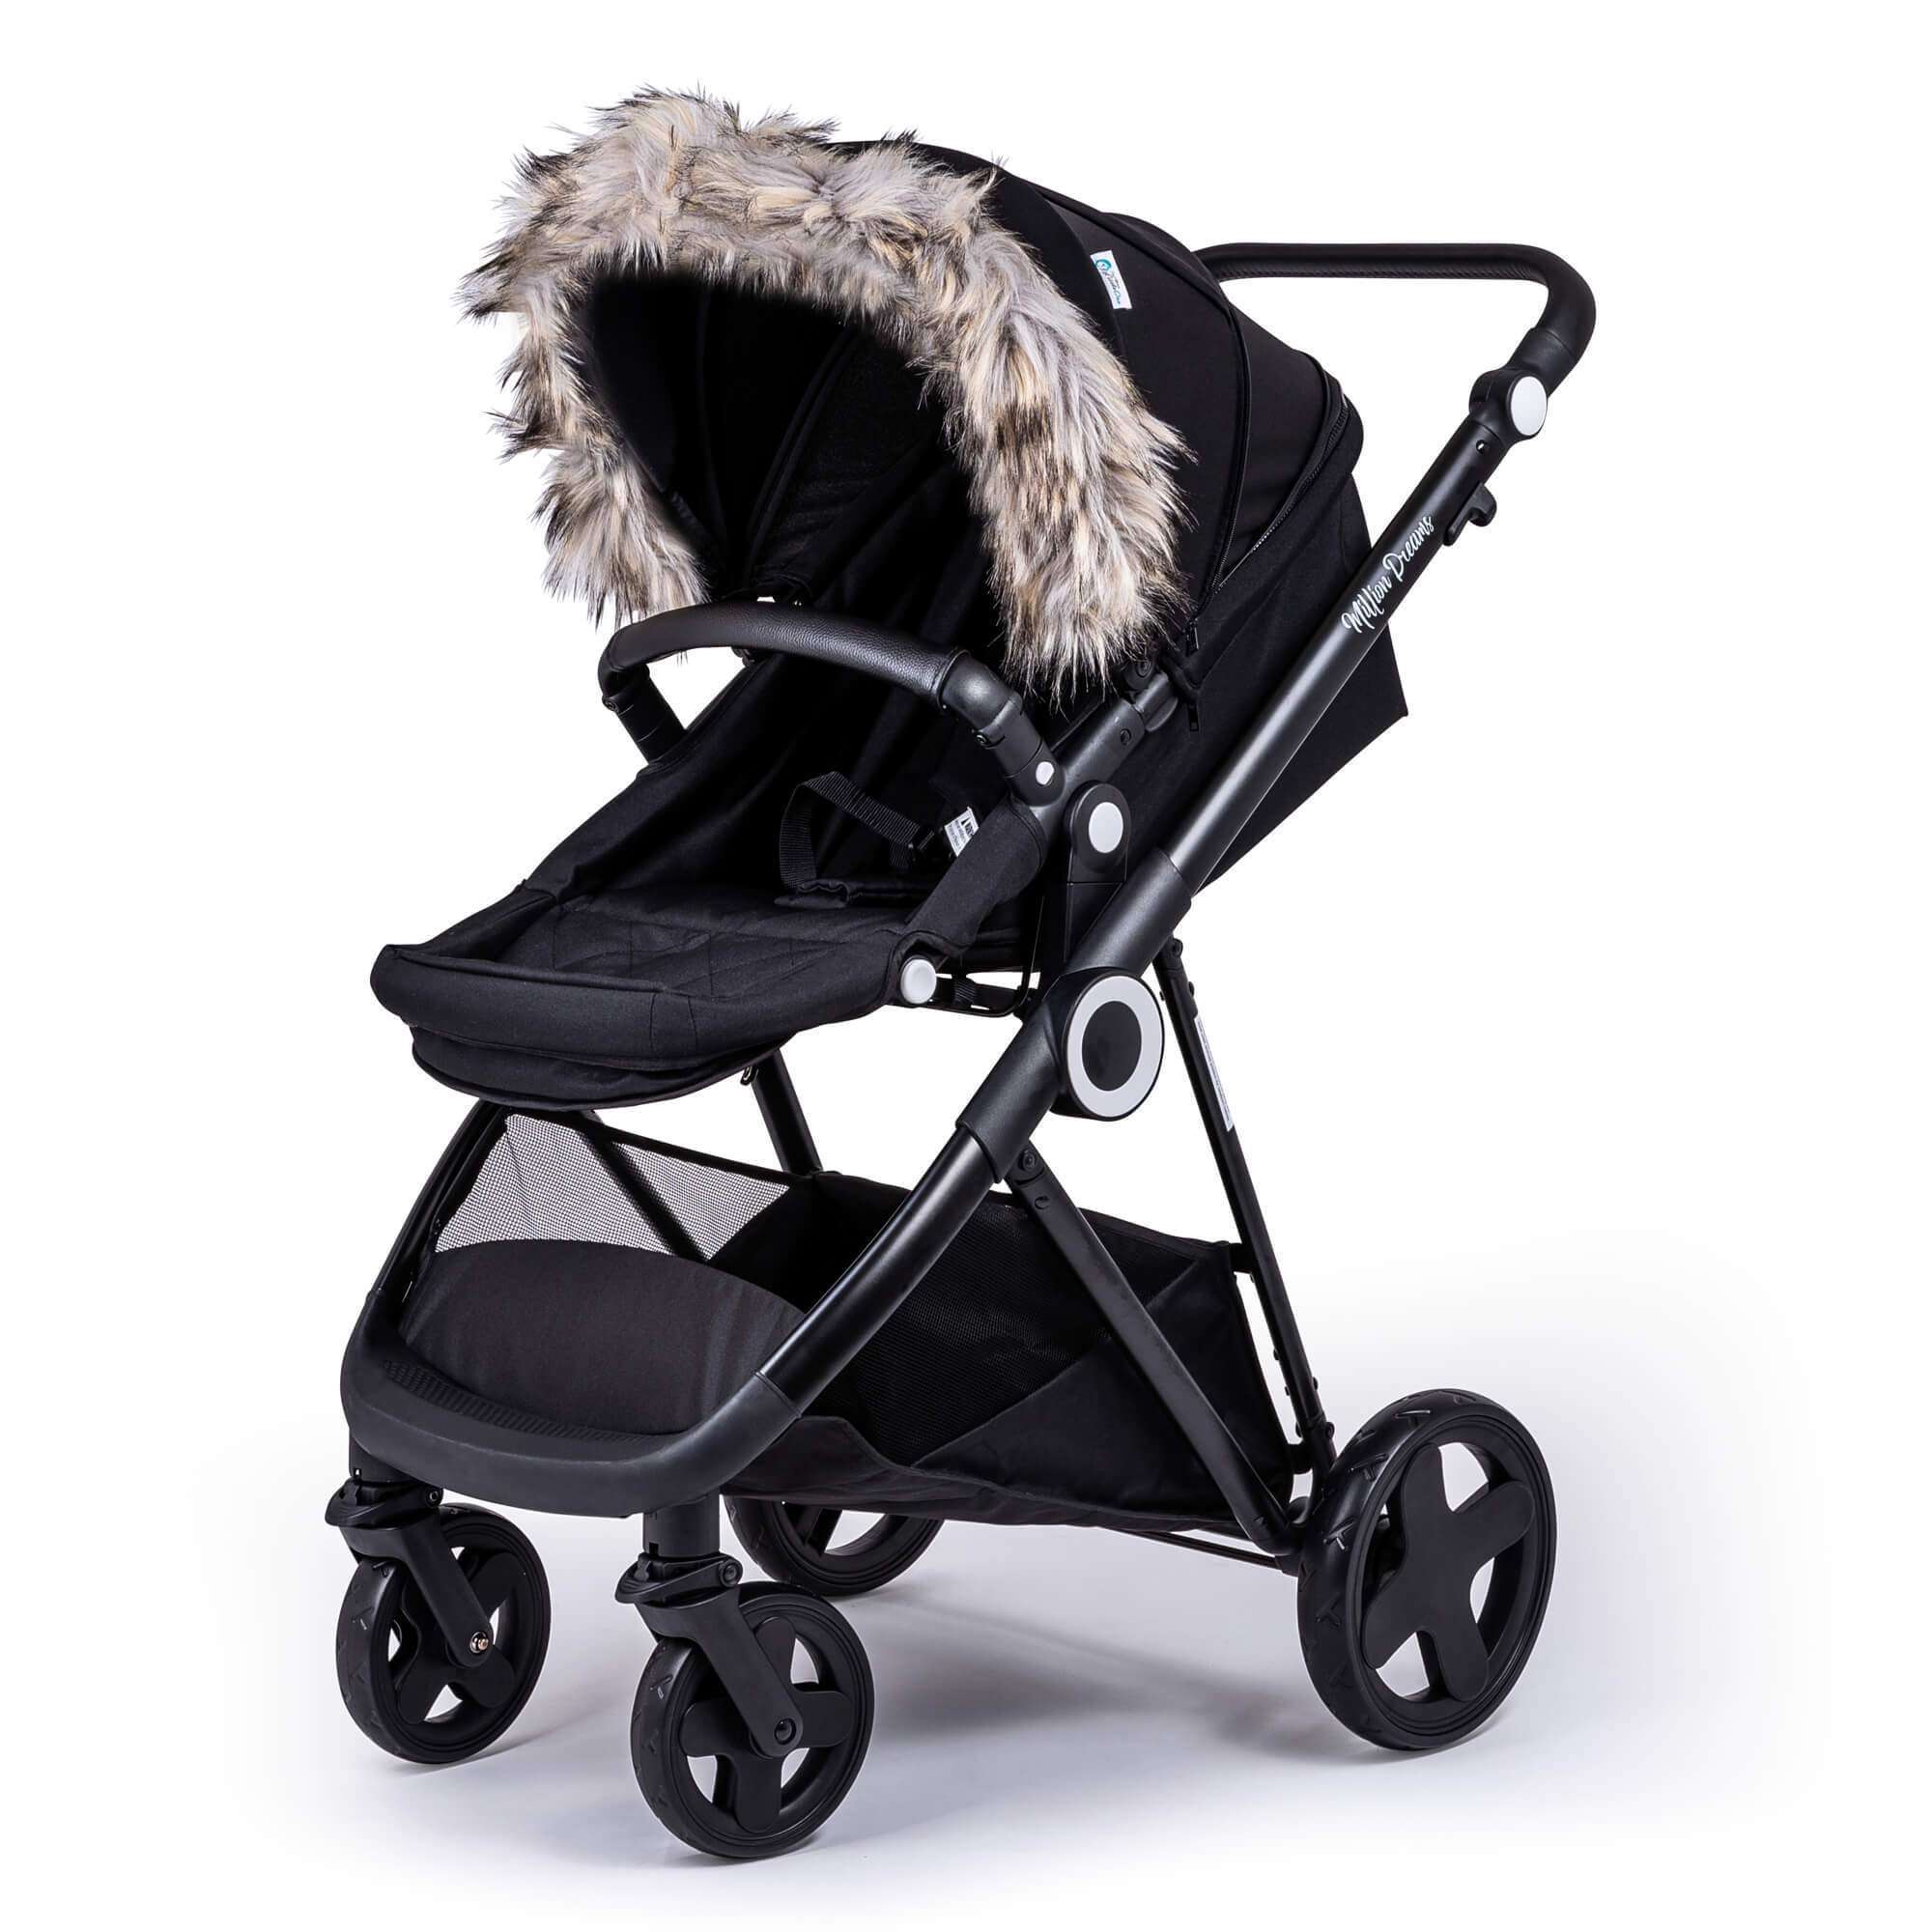 Pram Fur Hood Trim Attachment for Pushchair Compatible with Firstwheels - For Your Little One